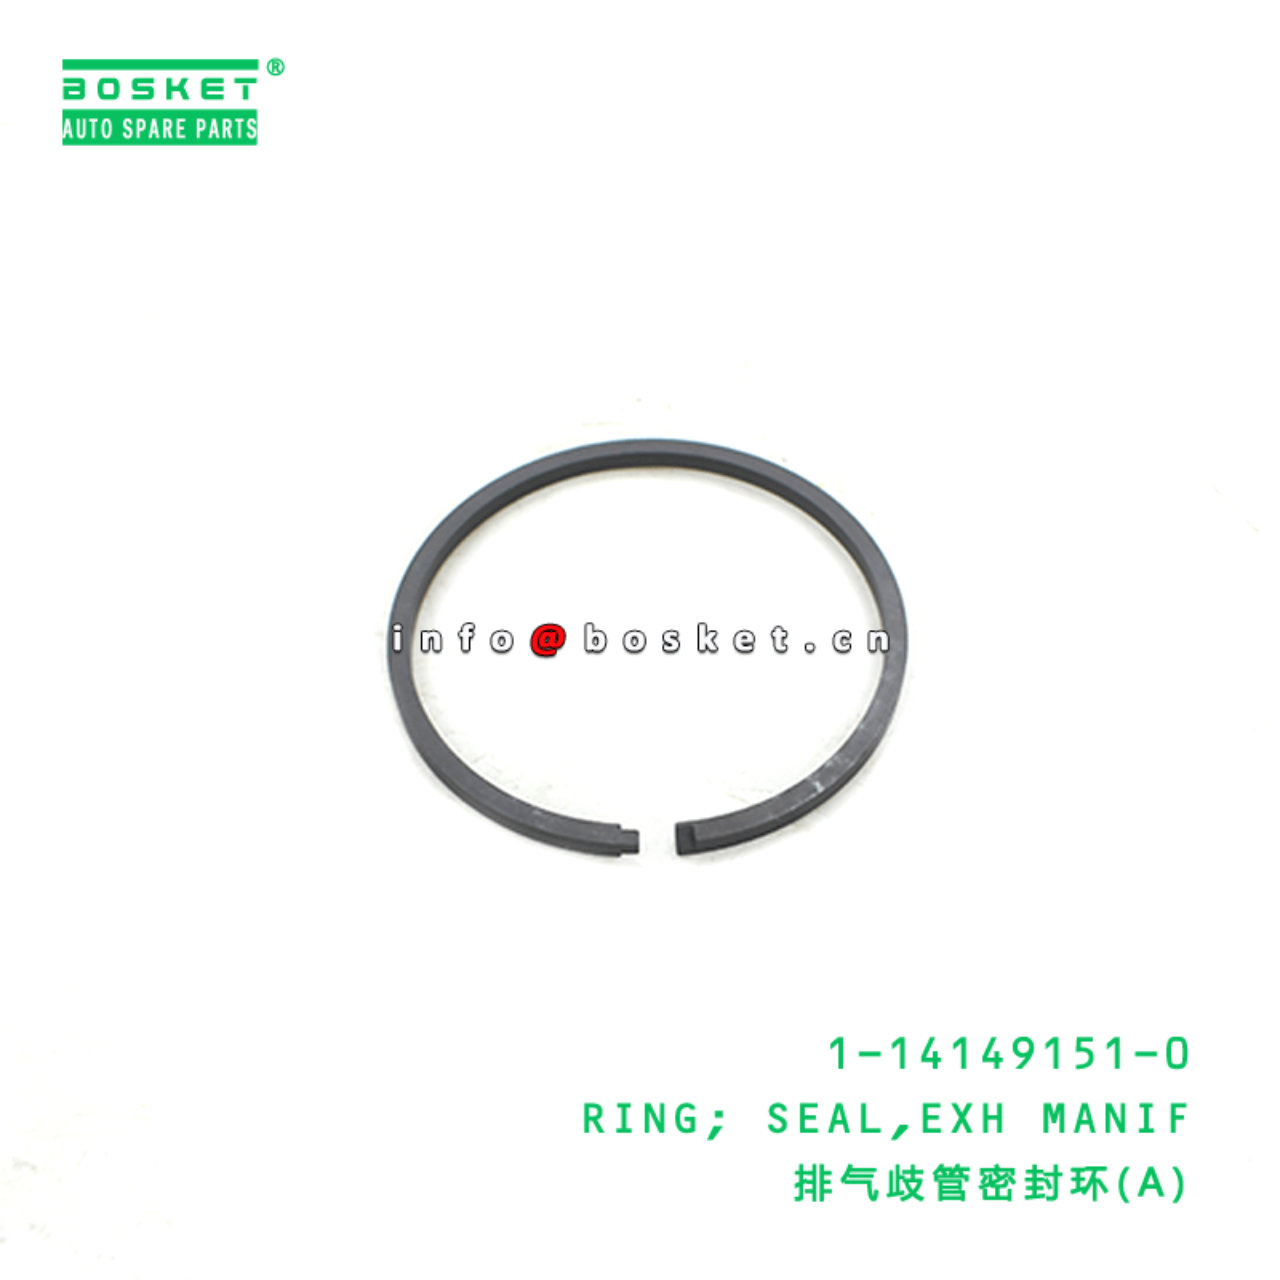 1-14149151-0 Exhaust Manifold Seal Ring 1141491510 Suitable for 